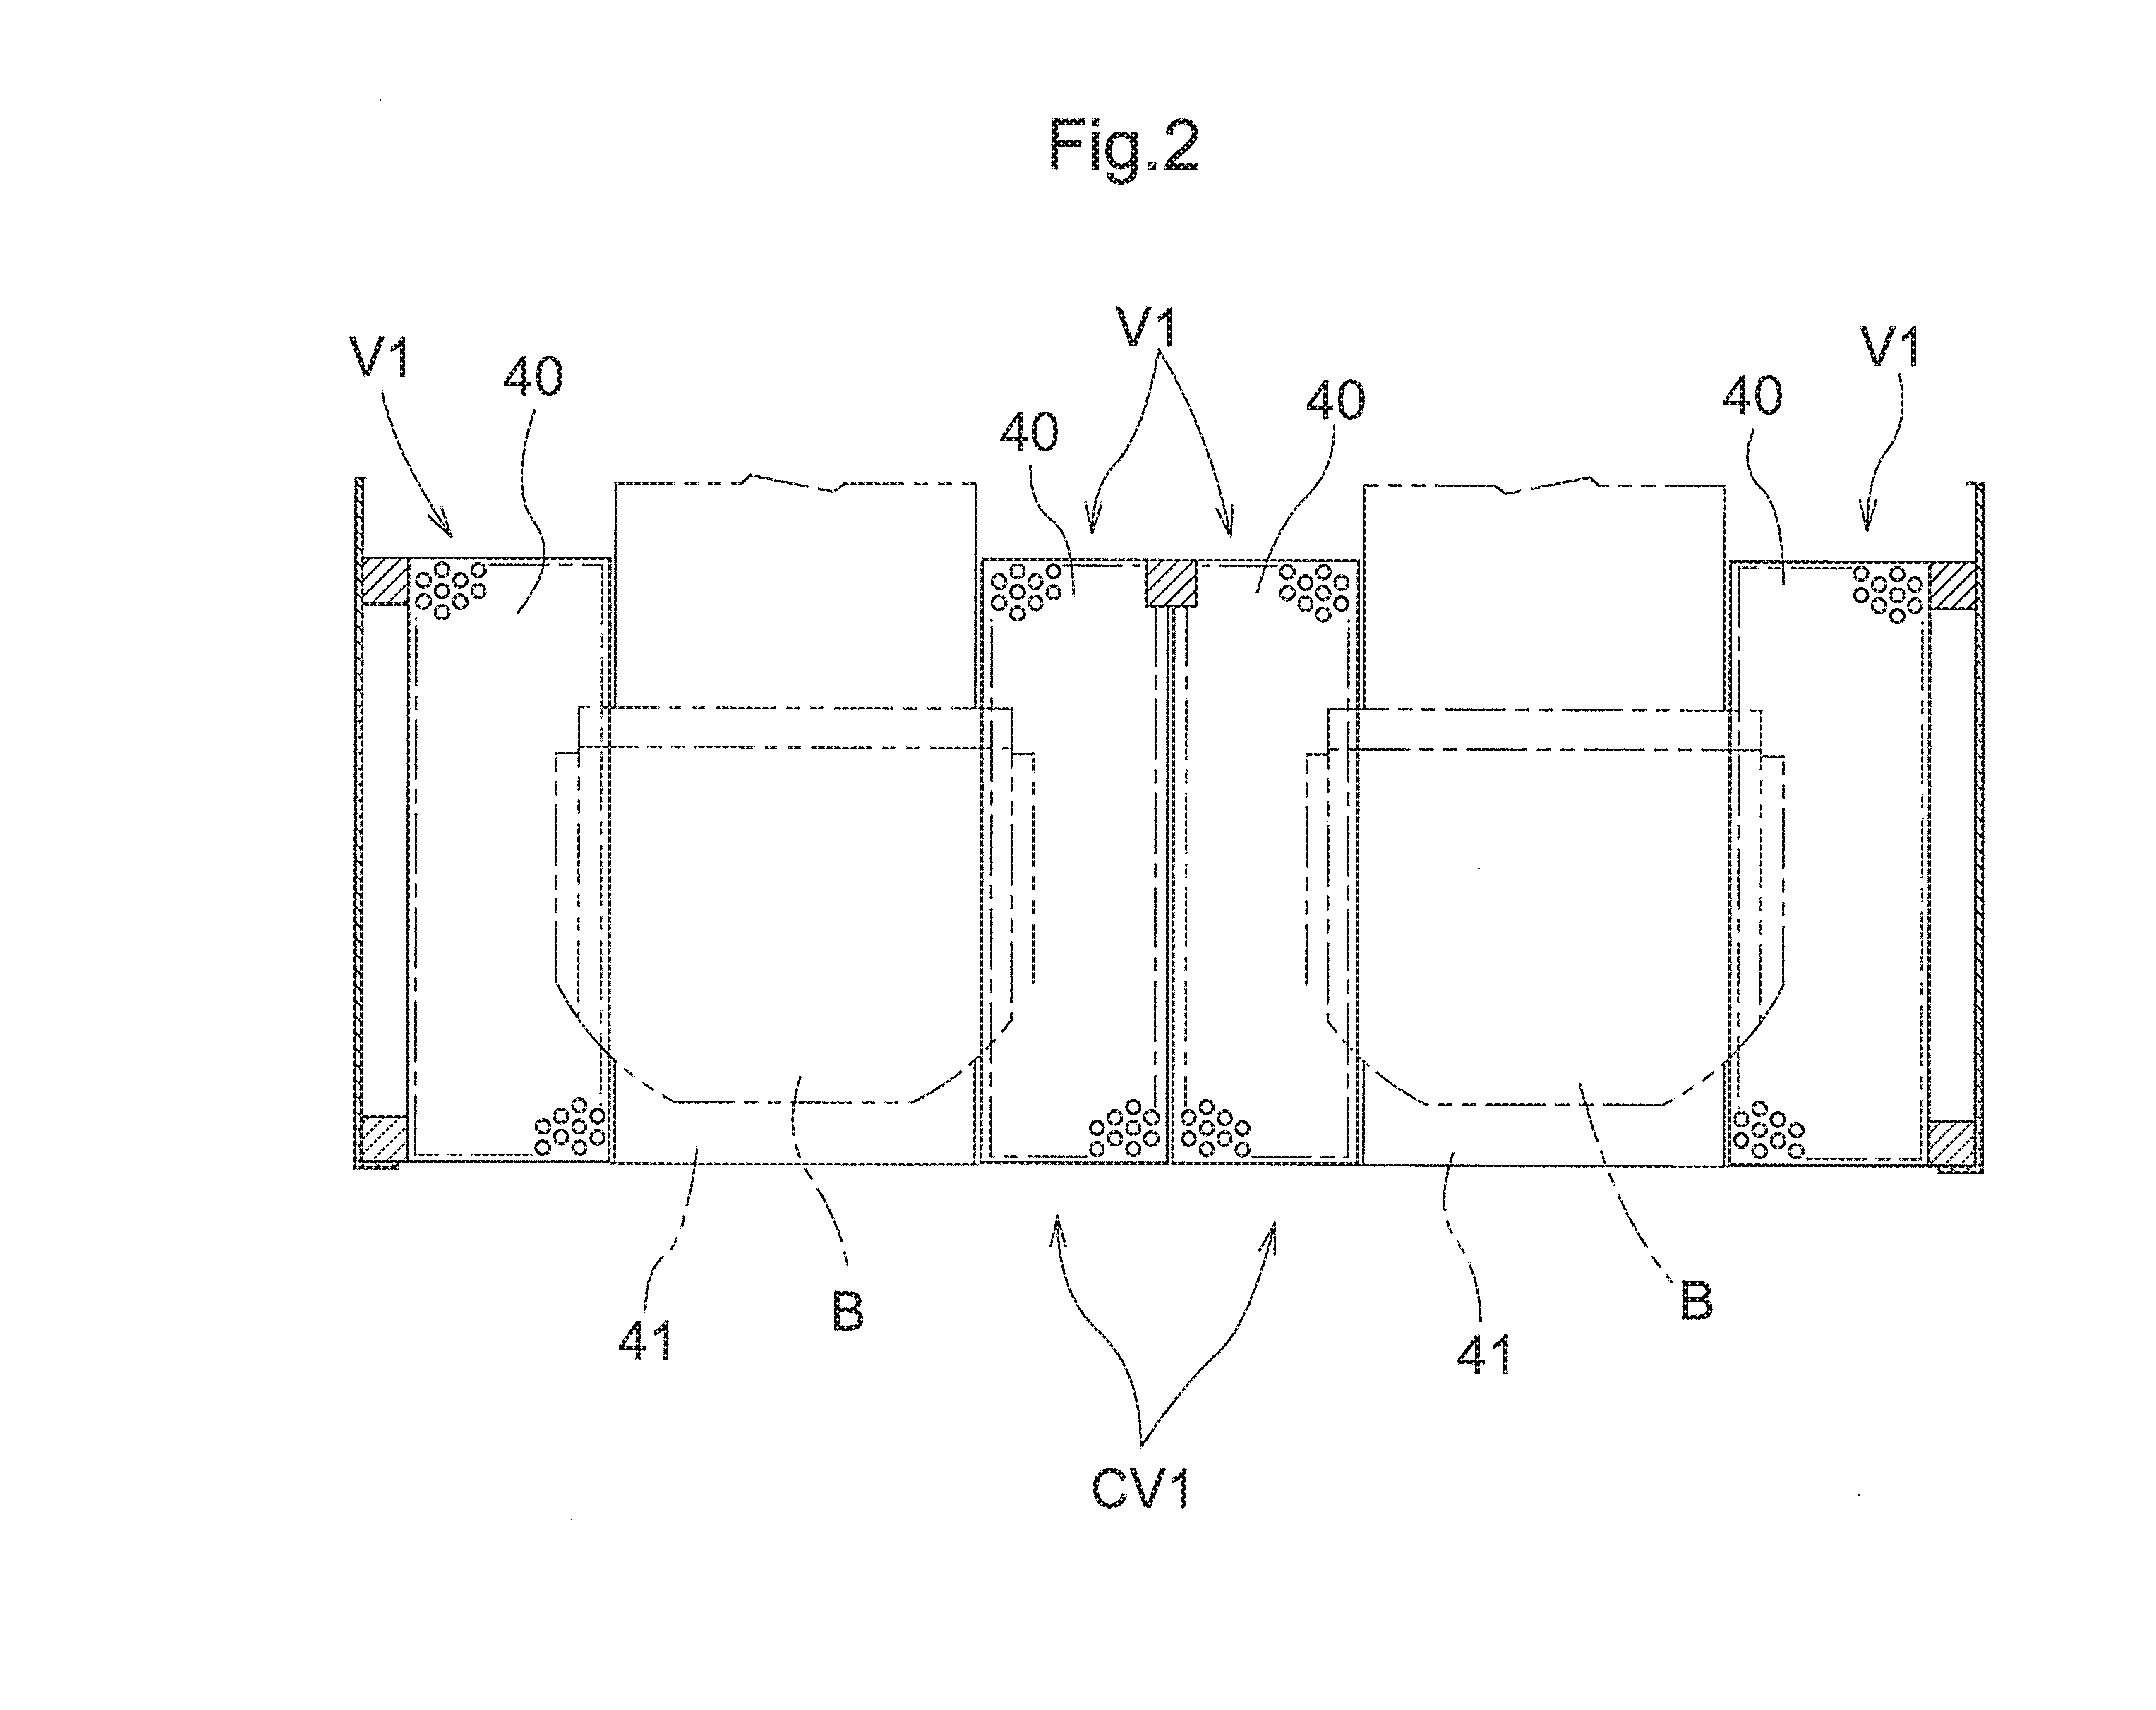 Storage Facility for Semiconductor Containers